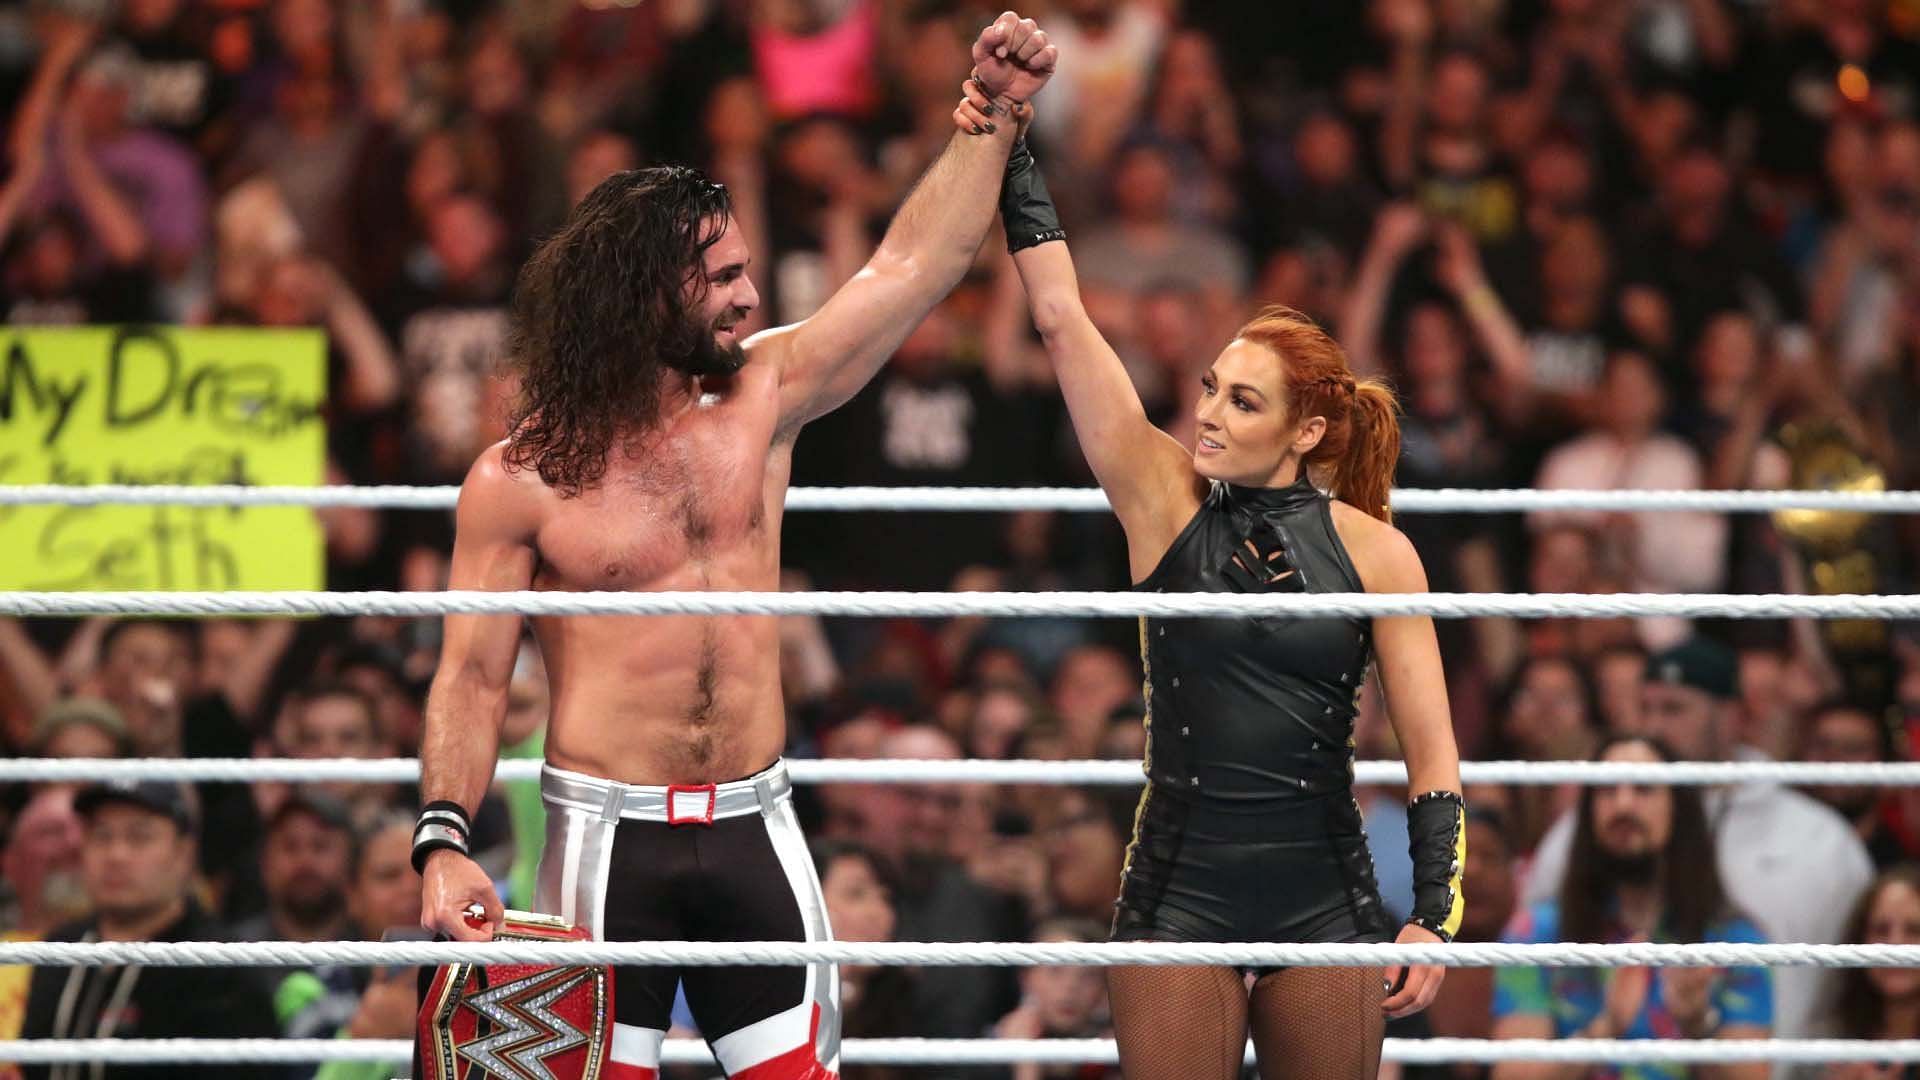 Seth Rollins and Becky Lynch celebrate in the WWE ring